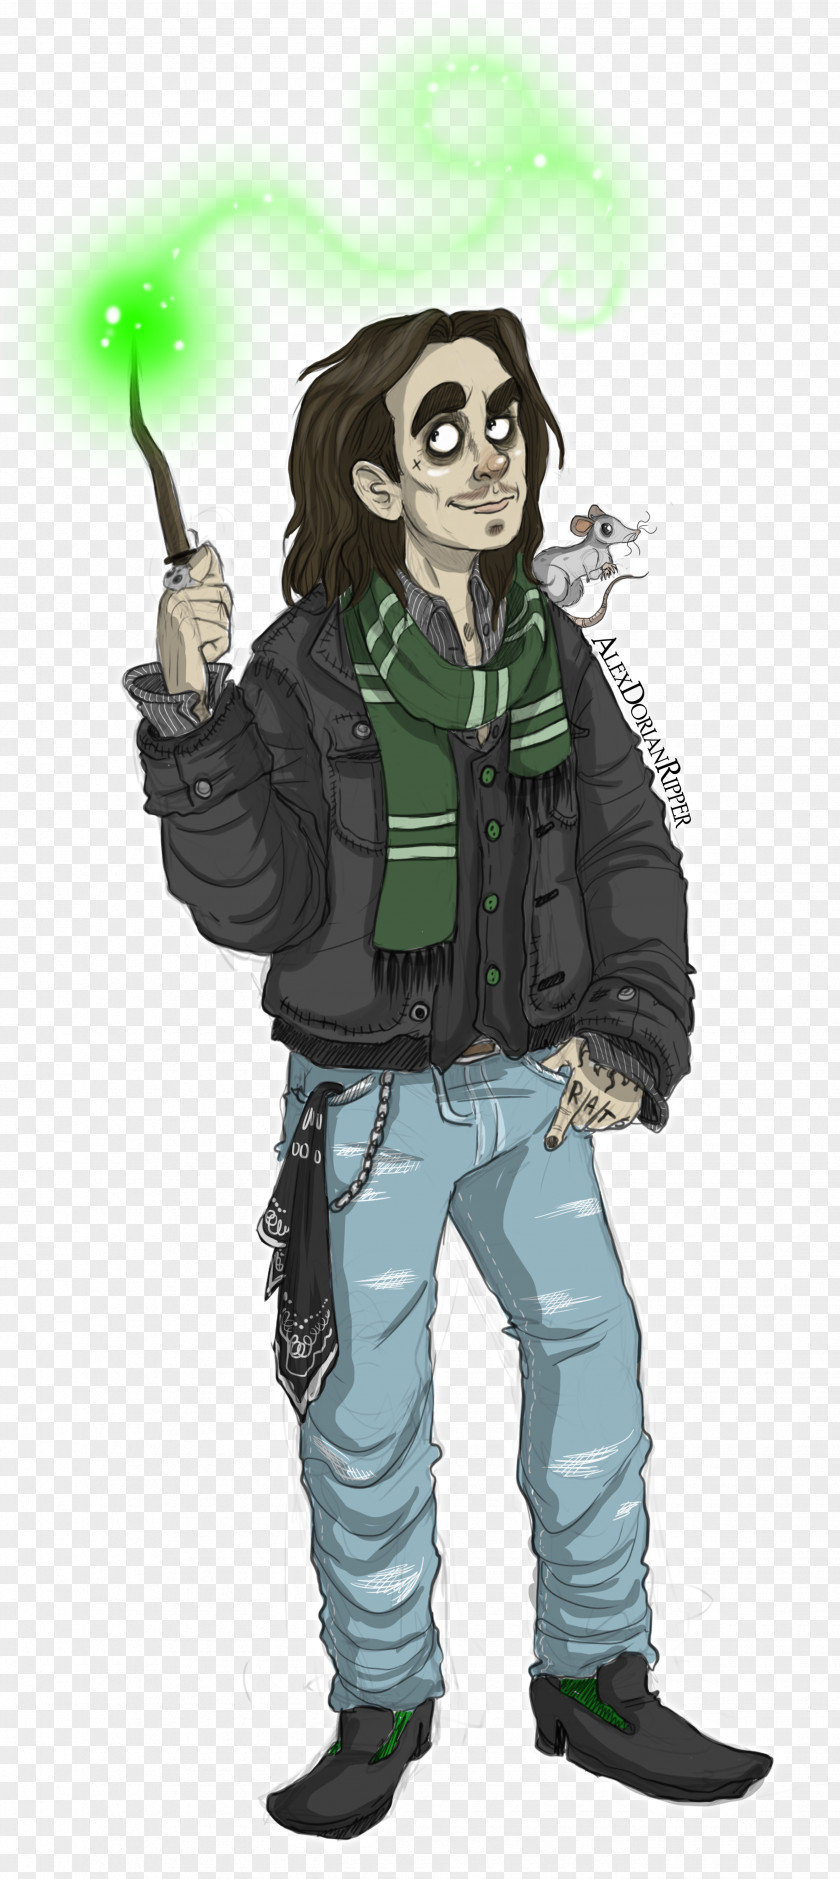 Prince Darkness Alice Cooper Harry Potter (Literary Series) Professor Severus Snape Hogwarts School Of Witchcraft And Wizardry Fan Art PNG